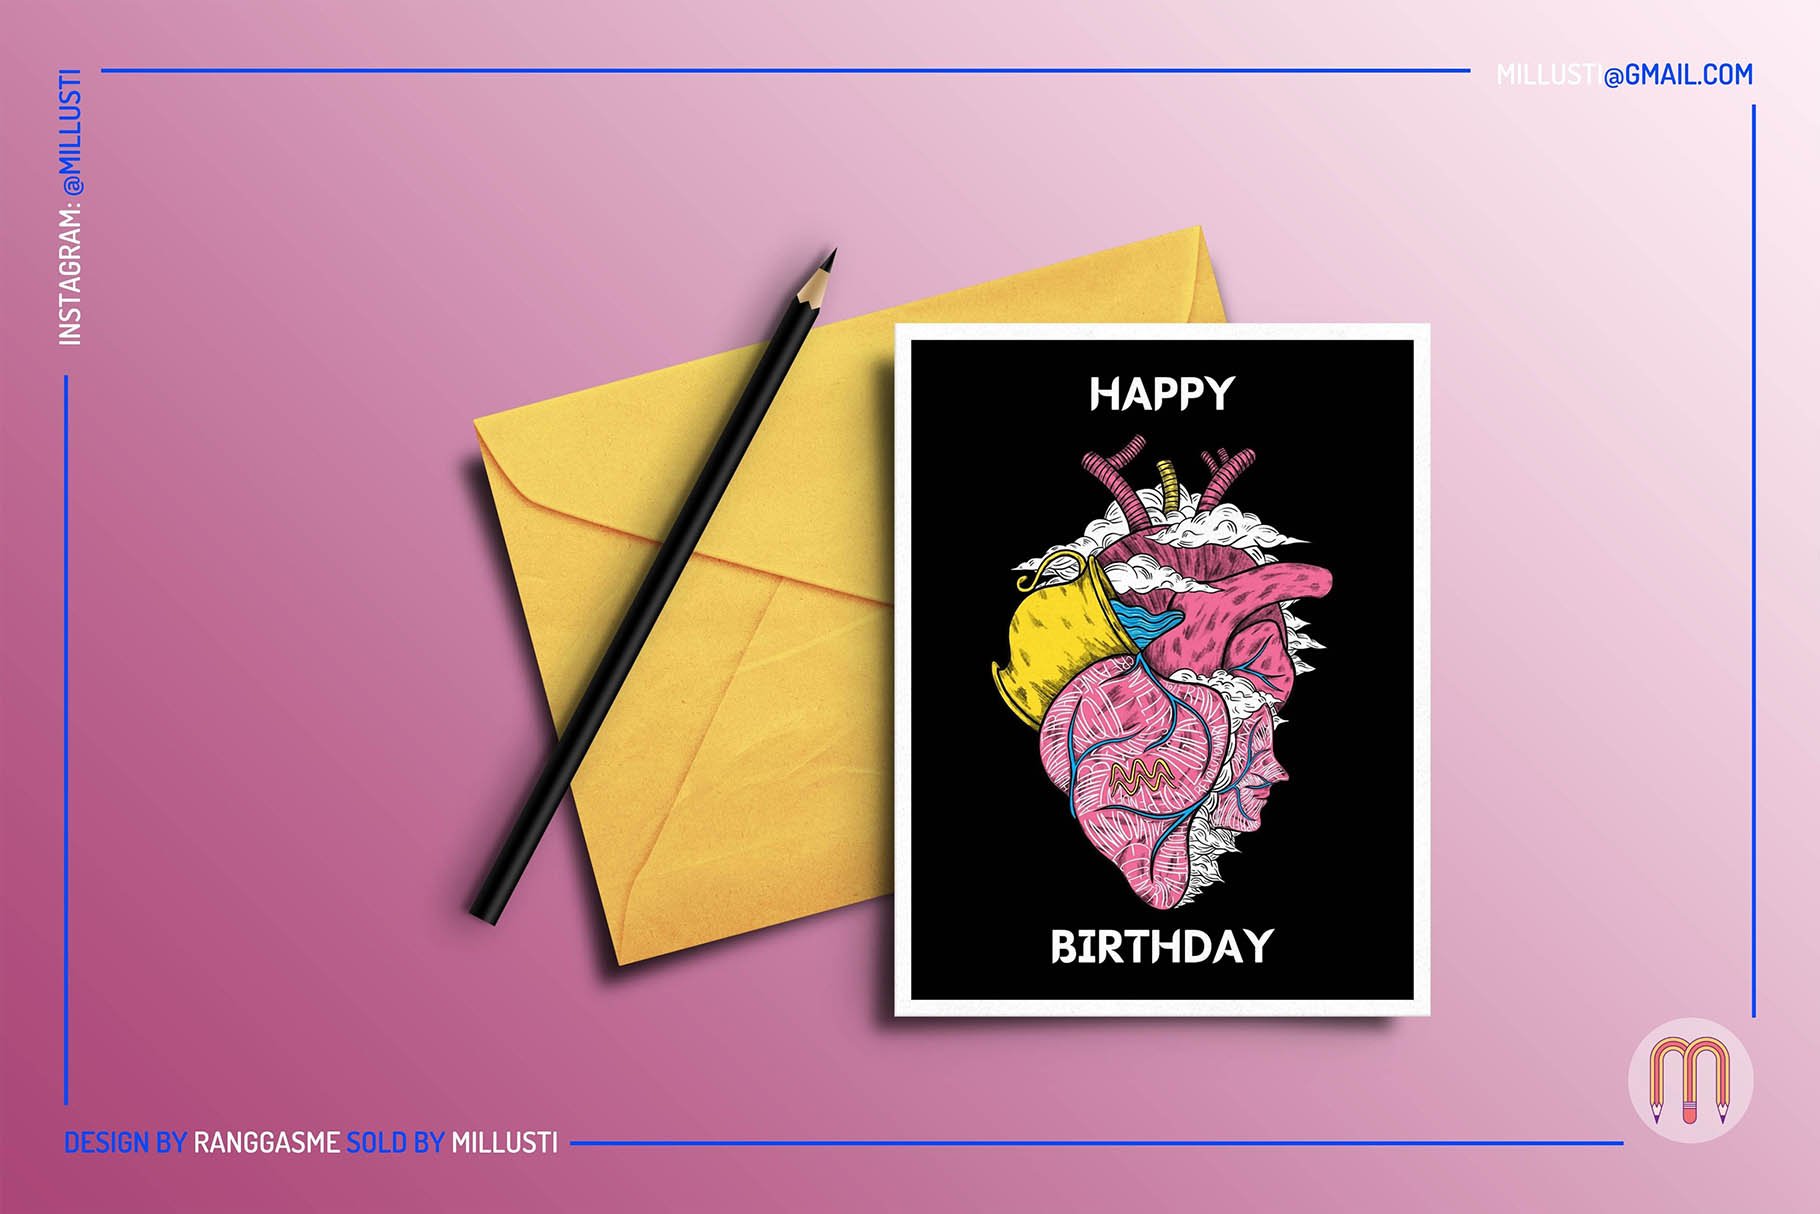 Black postcard with a greeting and colorful astrology heart.